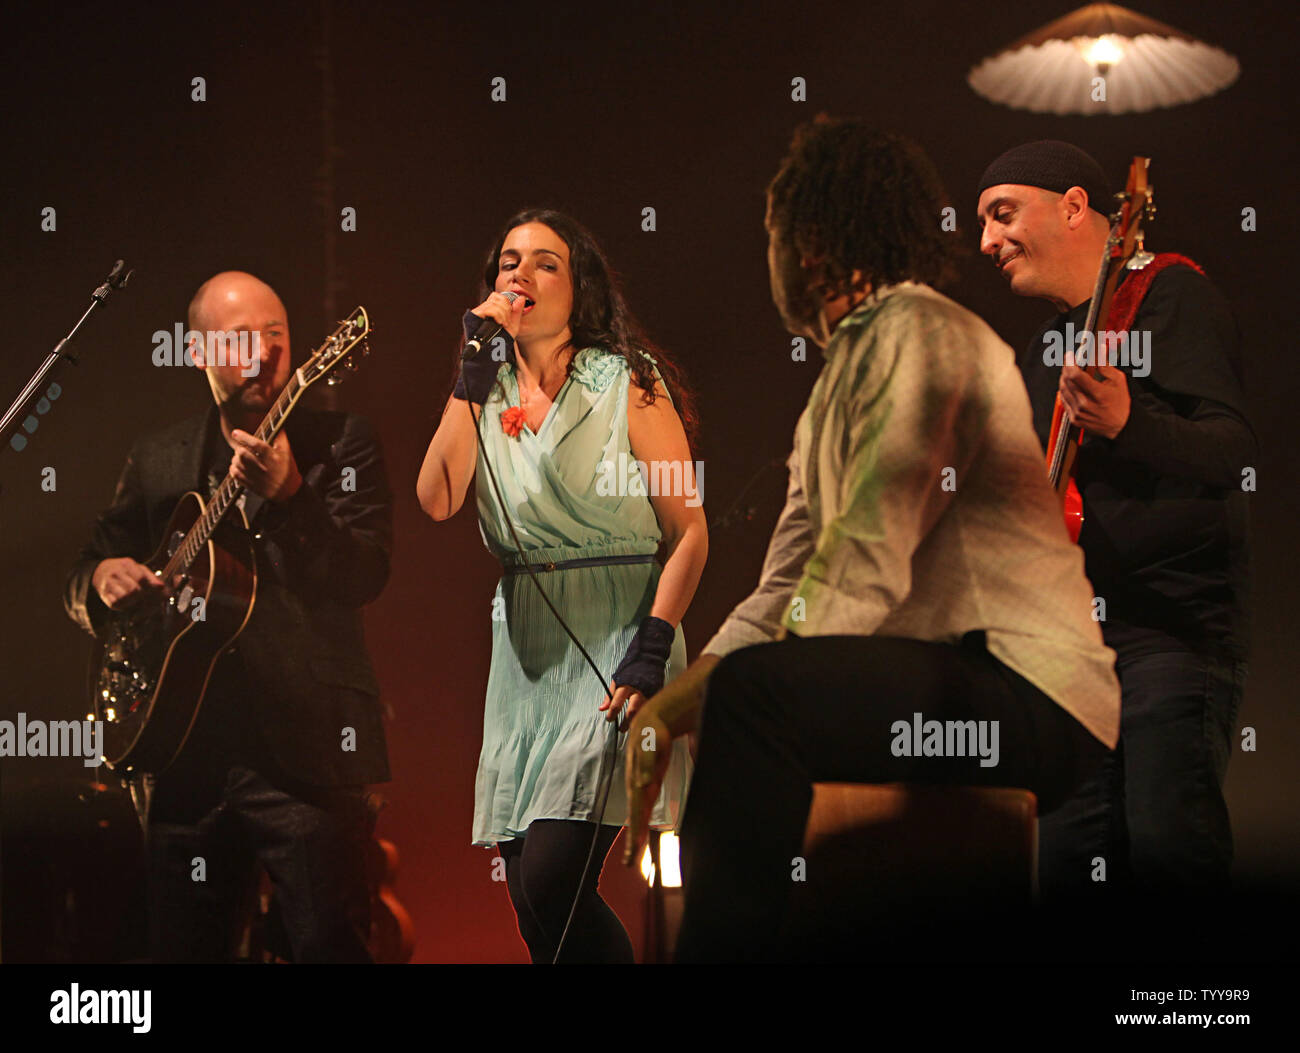 Yael Naim and her band perform in concert at Olympia Hall in Paris on May 3, 2011.   UPI/David Silpa Stock Photo